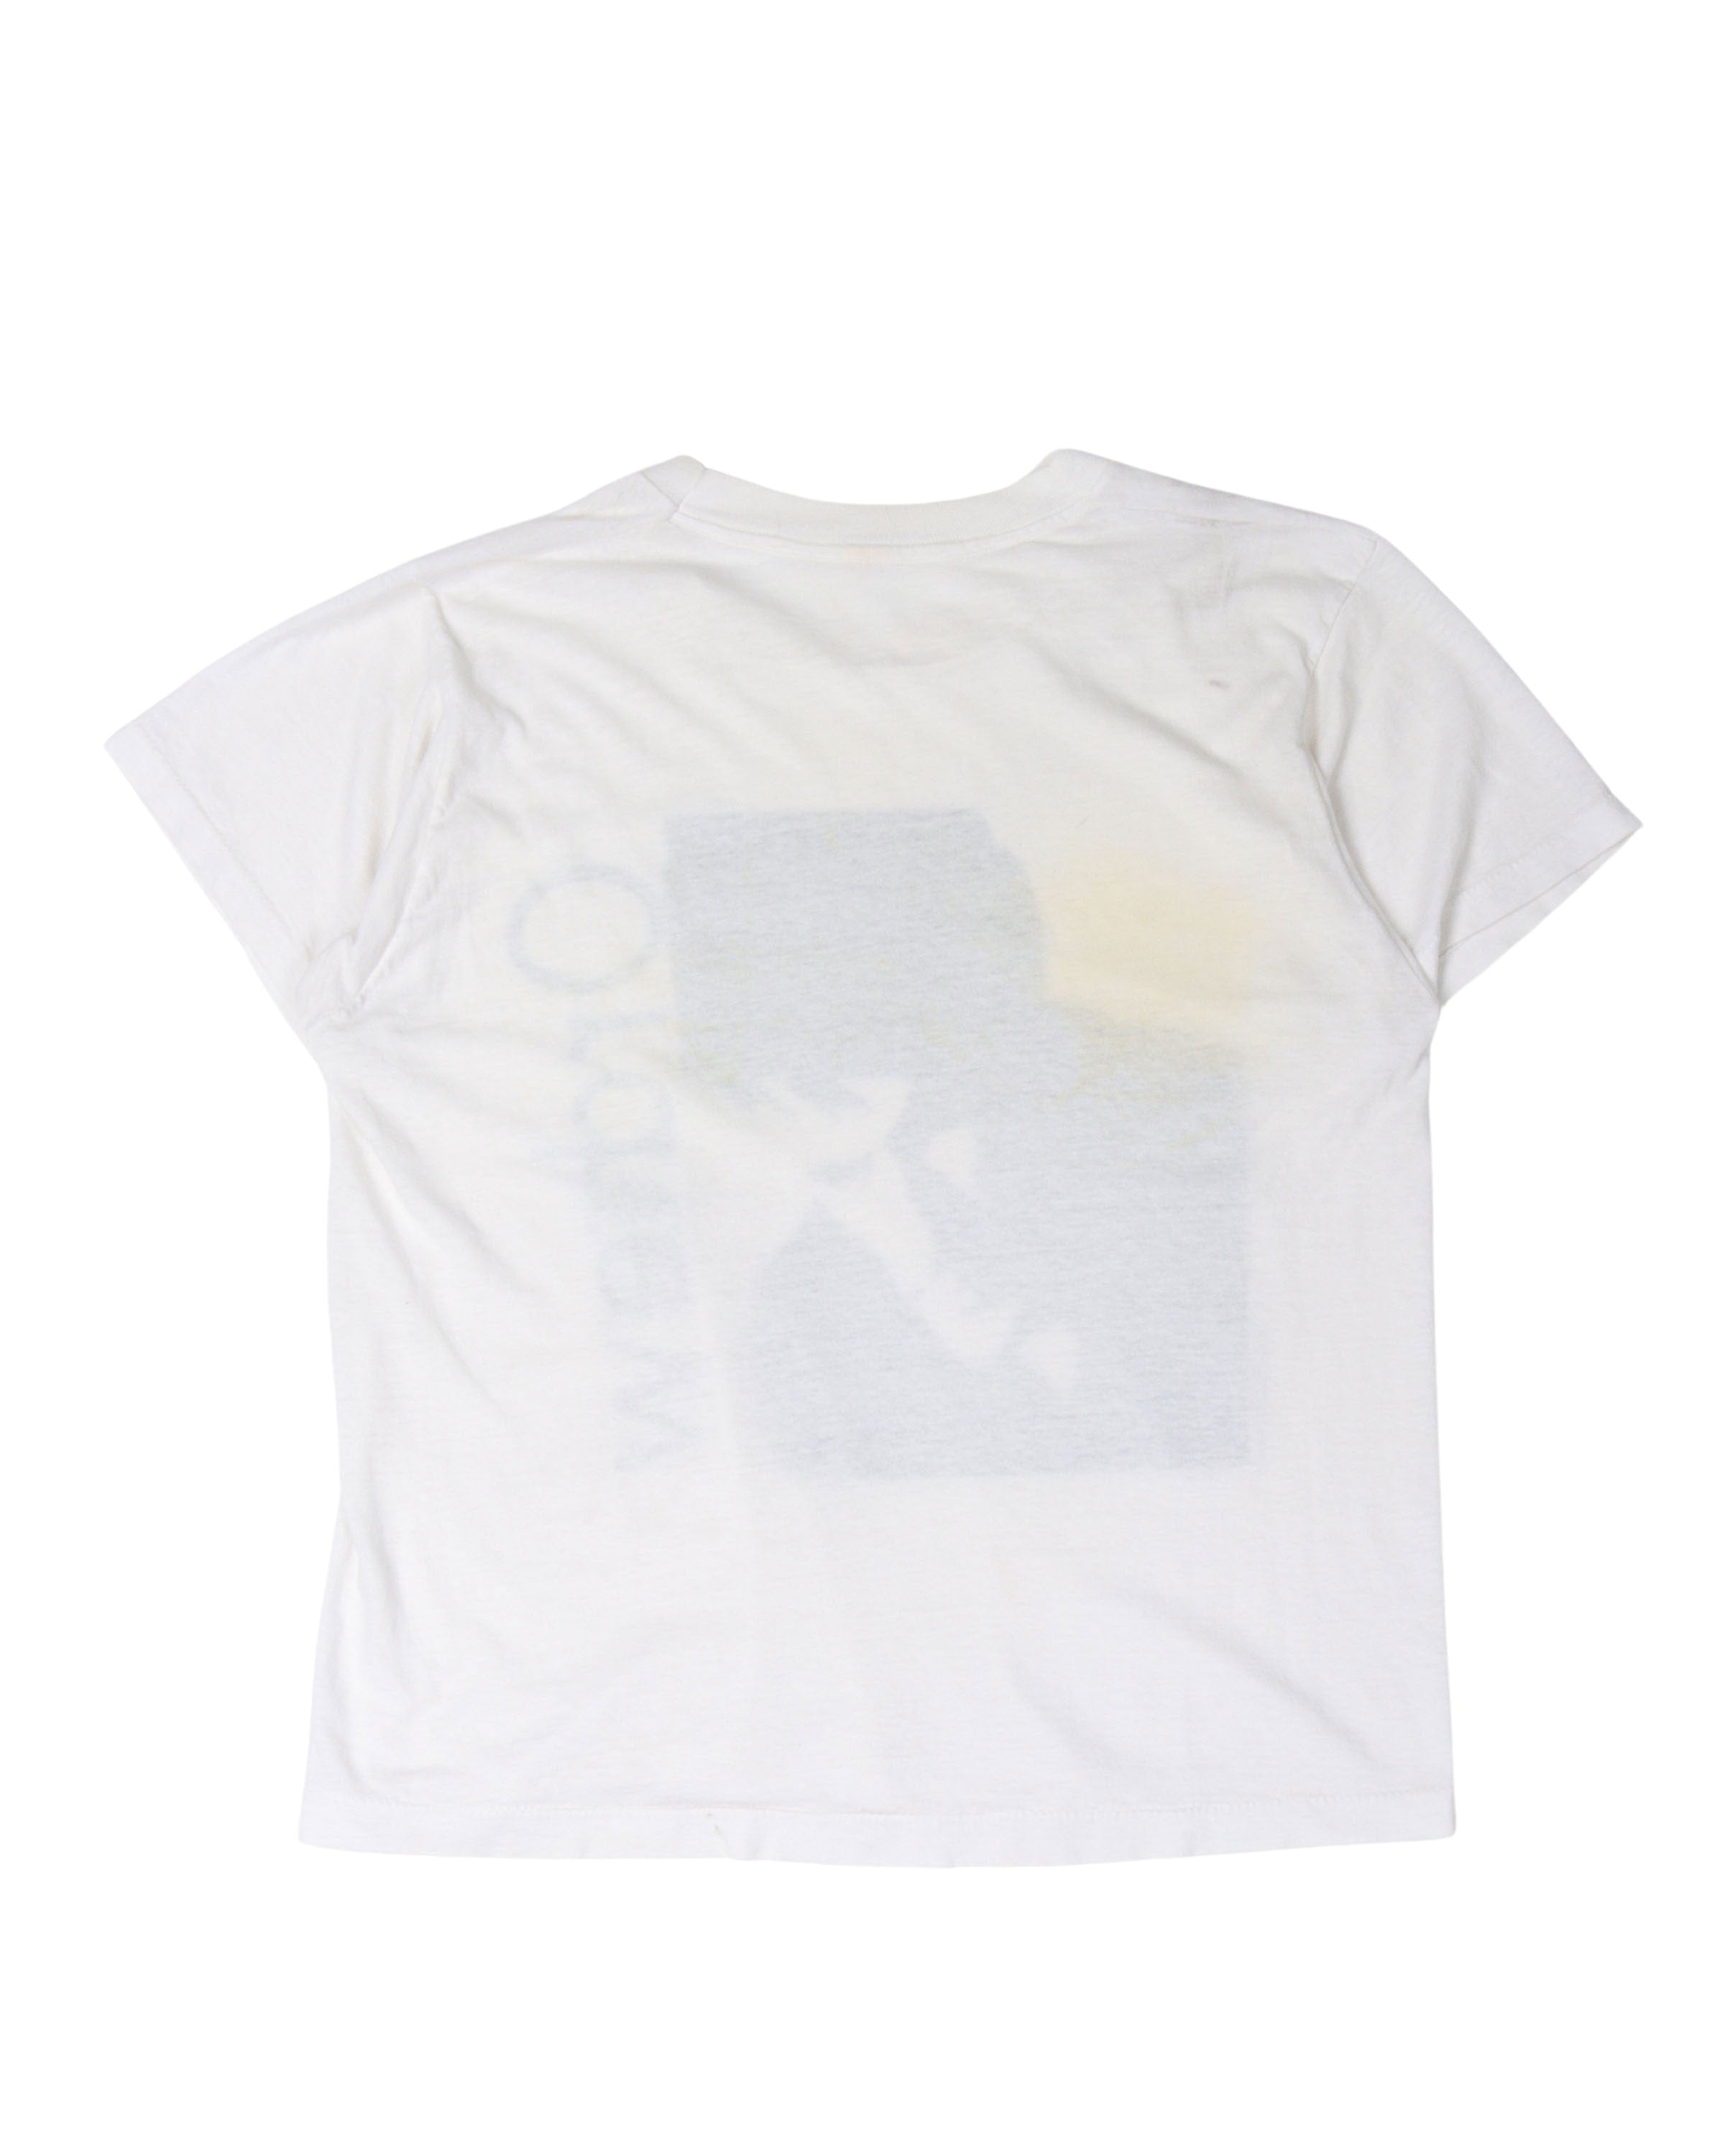 New Order "Low-Life" T-Shirt